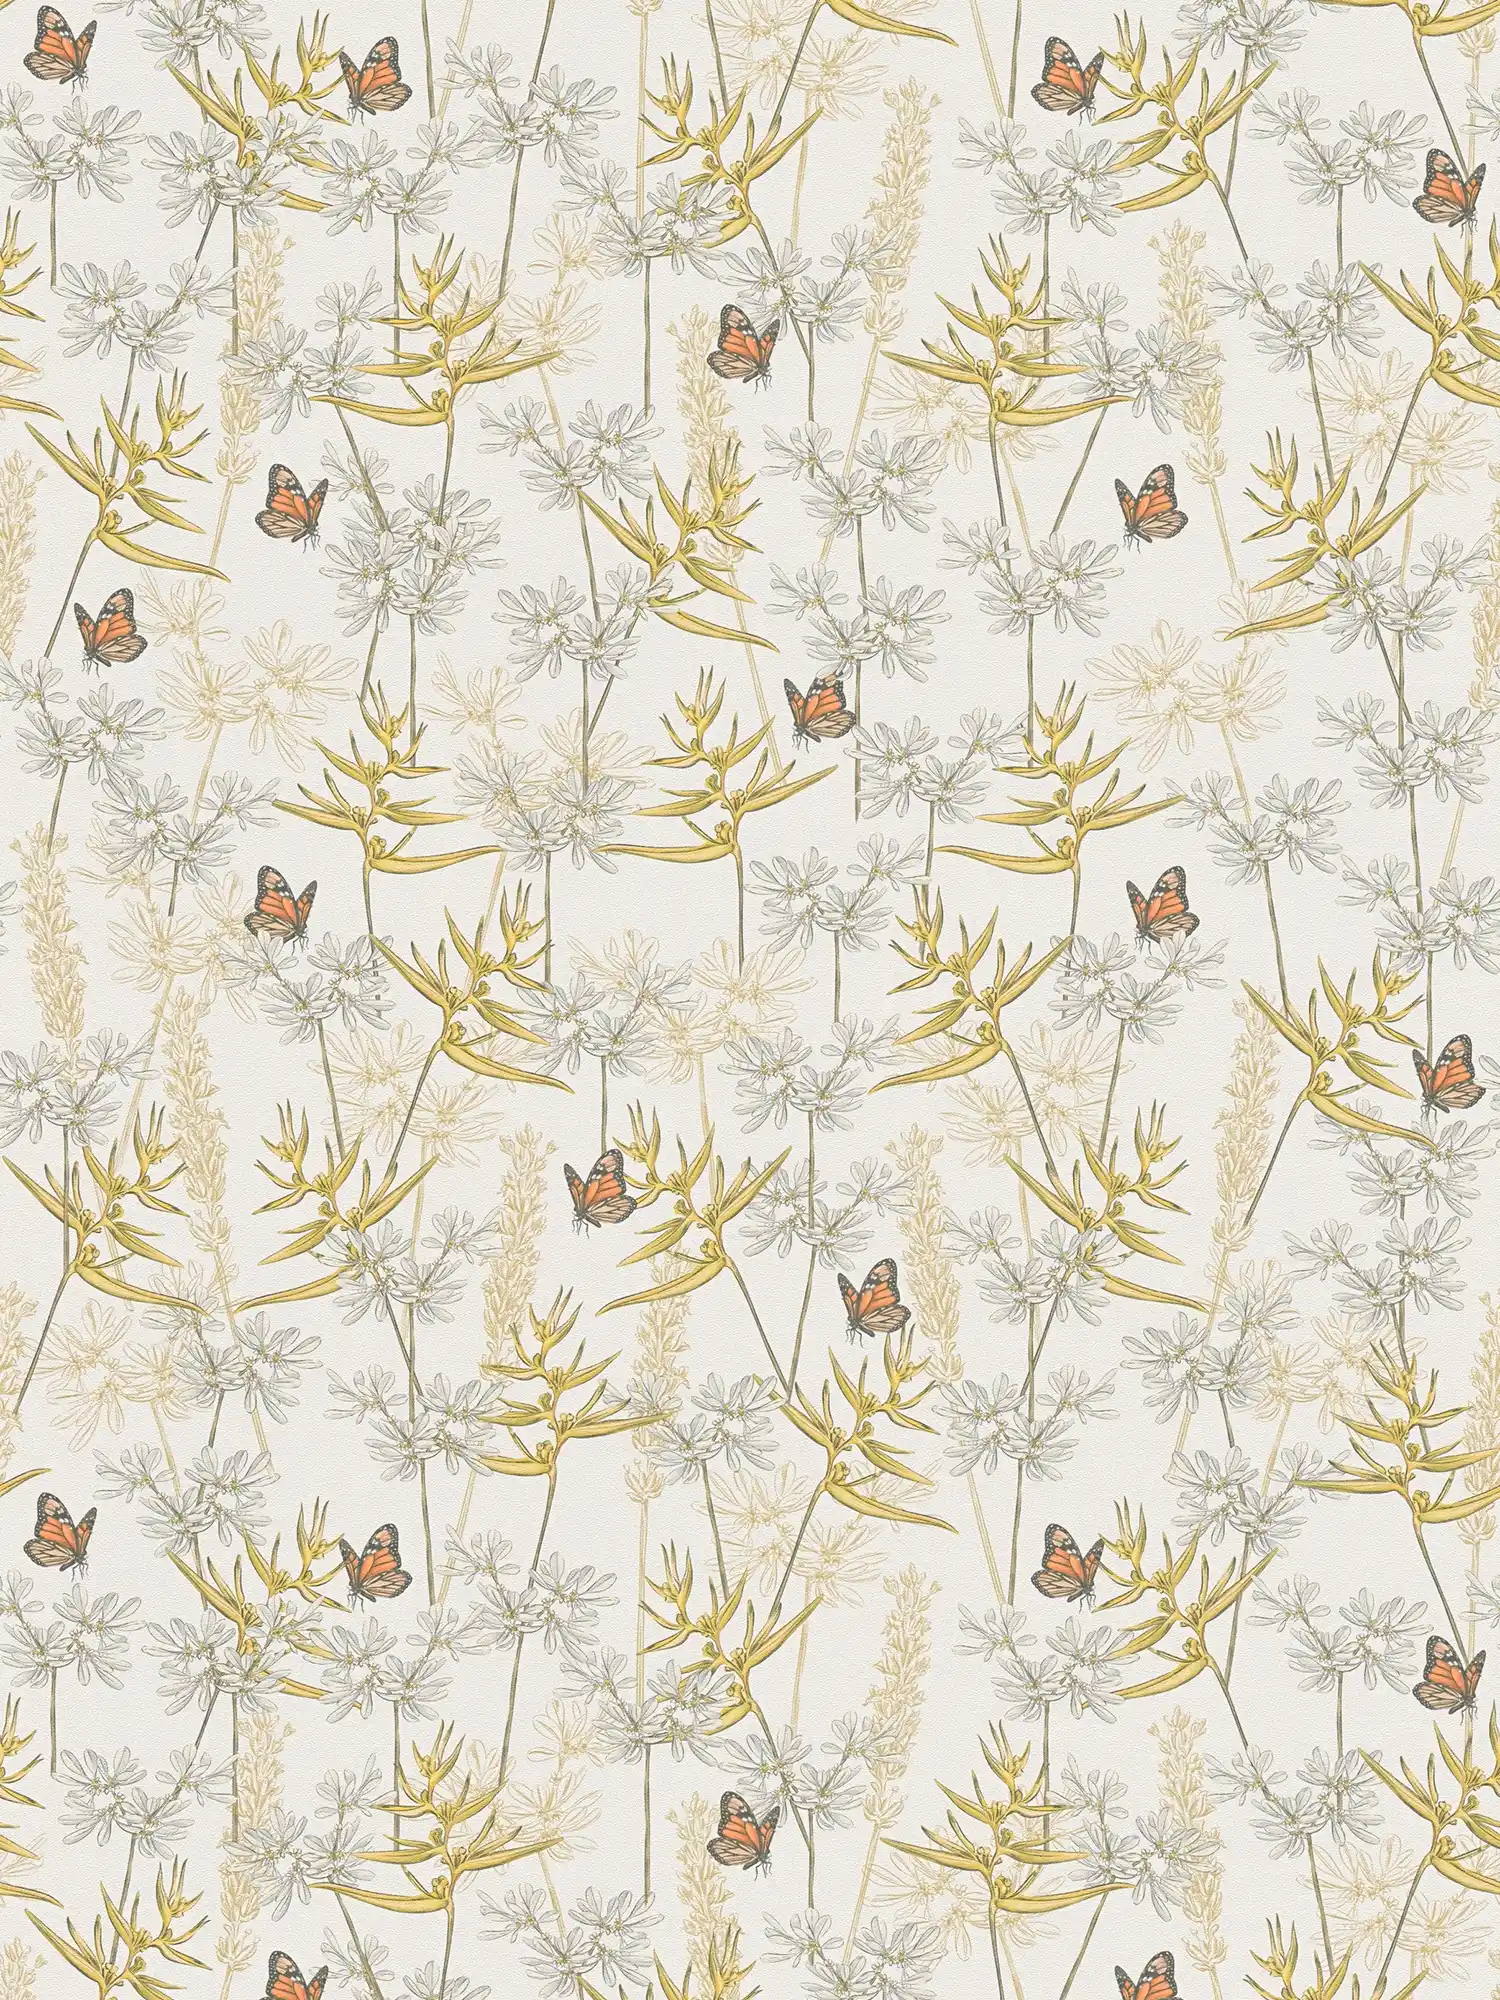 Floral style wallpaper with grasses & butterflies textured matt - white, yellow, grey
